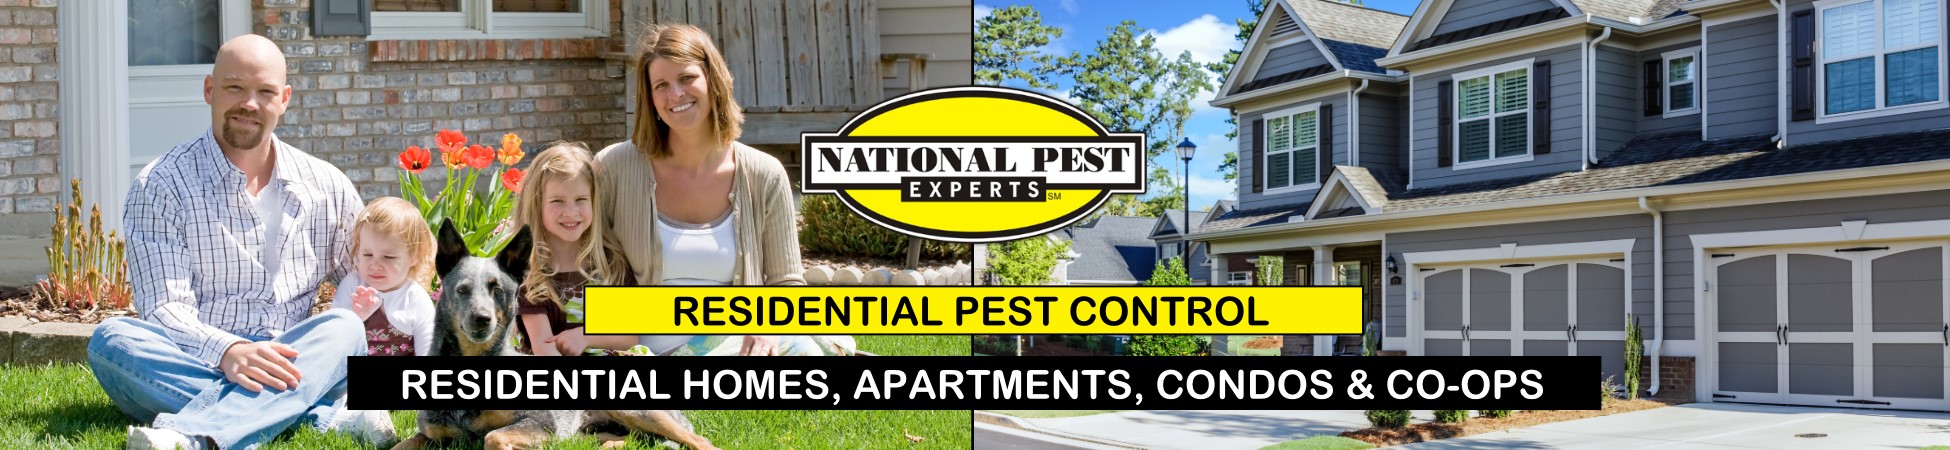 National Pest Experts - Residential exterminating and pest control in Melville, NY